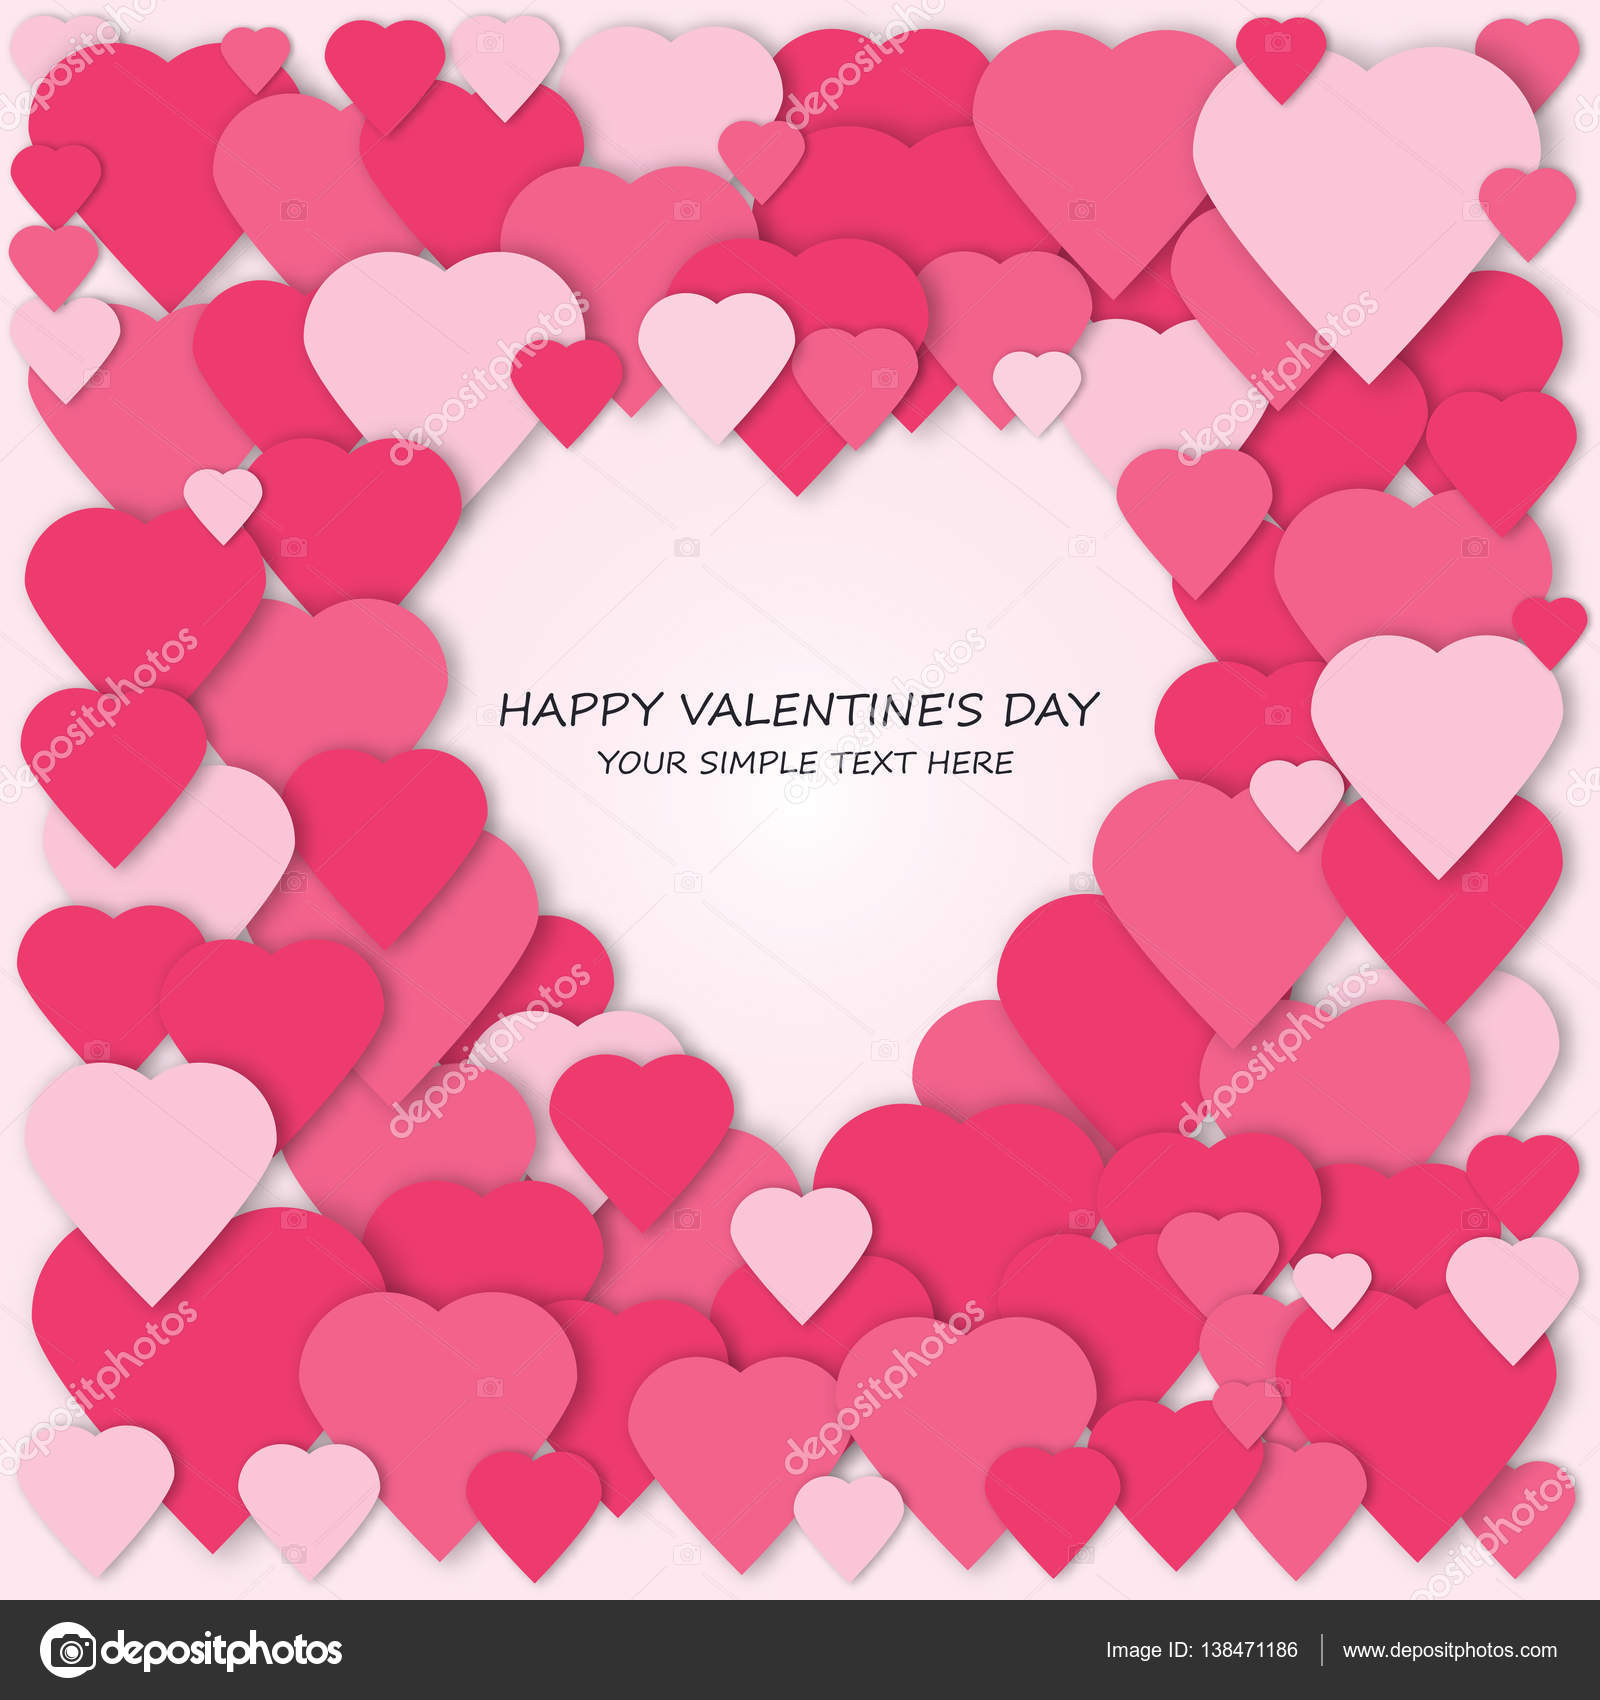 3d Paper Hearts Collage Vector Card Pink Hearts Background